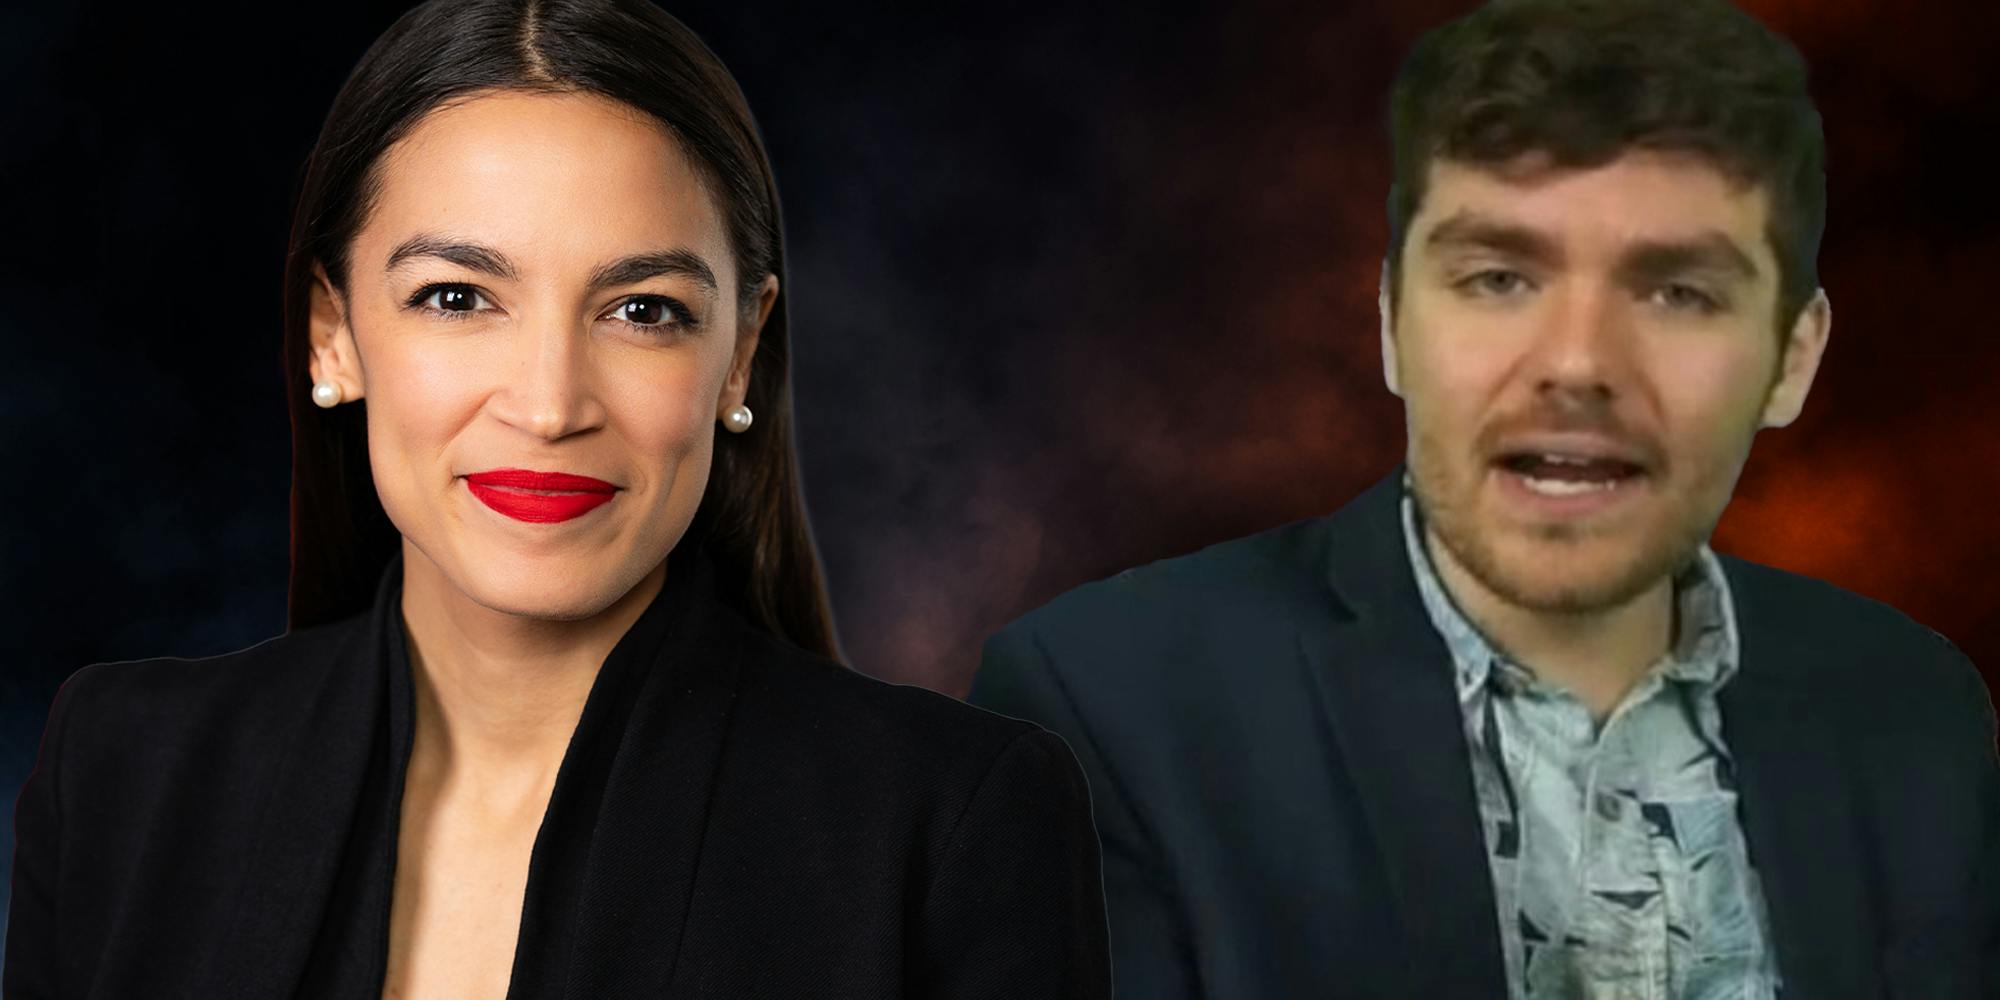 AOC rejects Nick Fuentes' praise for anti-AIPAC stance